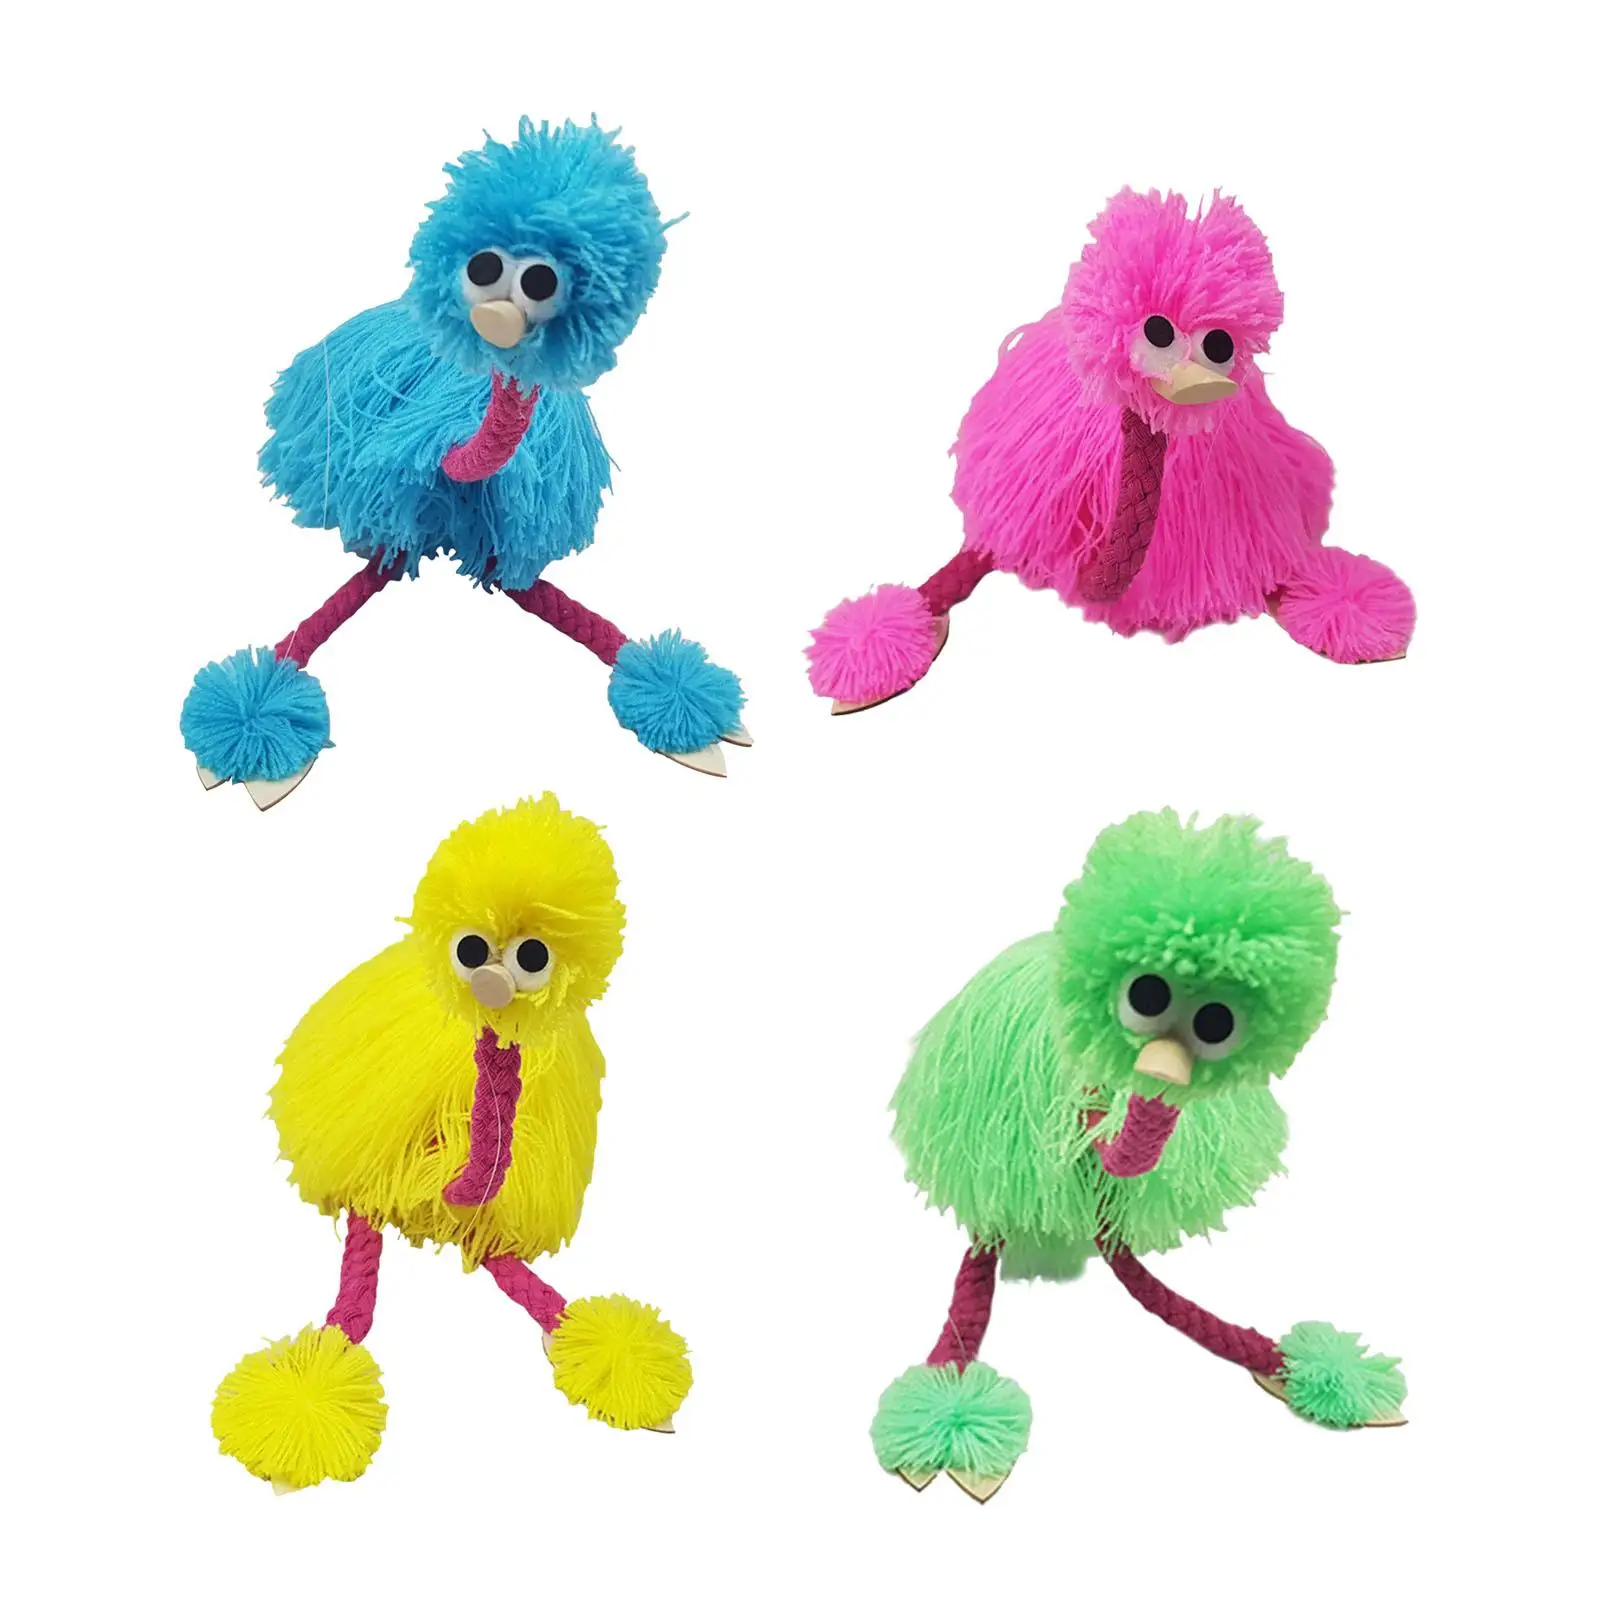 Cute Marionettes String Puppet Lovely Bird Animal Toy for Kids Gift ages 3 Years Old Stage Performance Party Toy Holiday